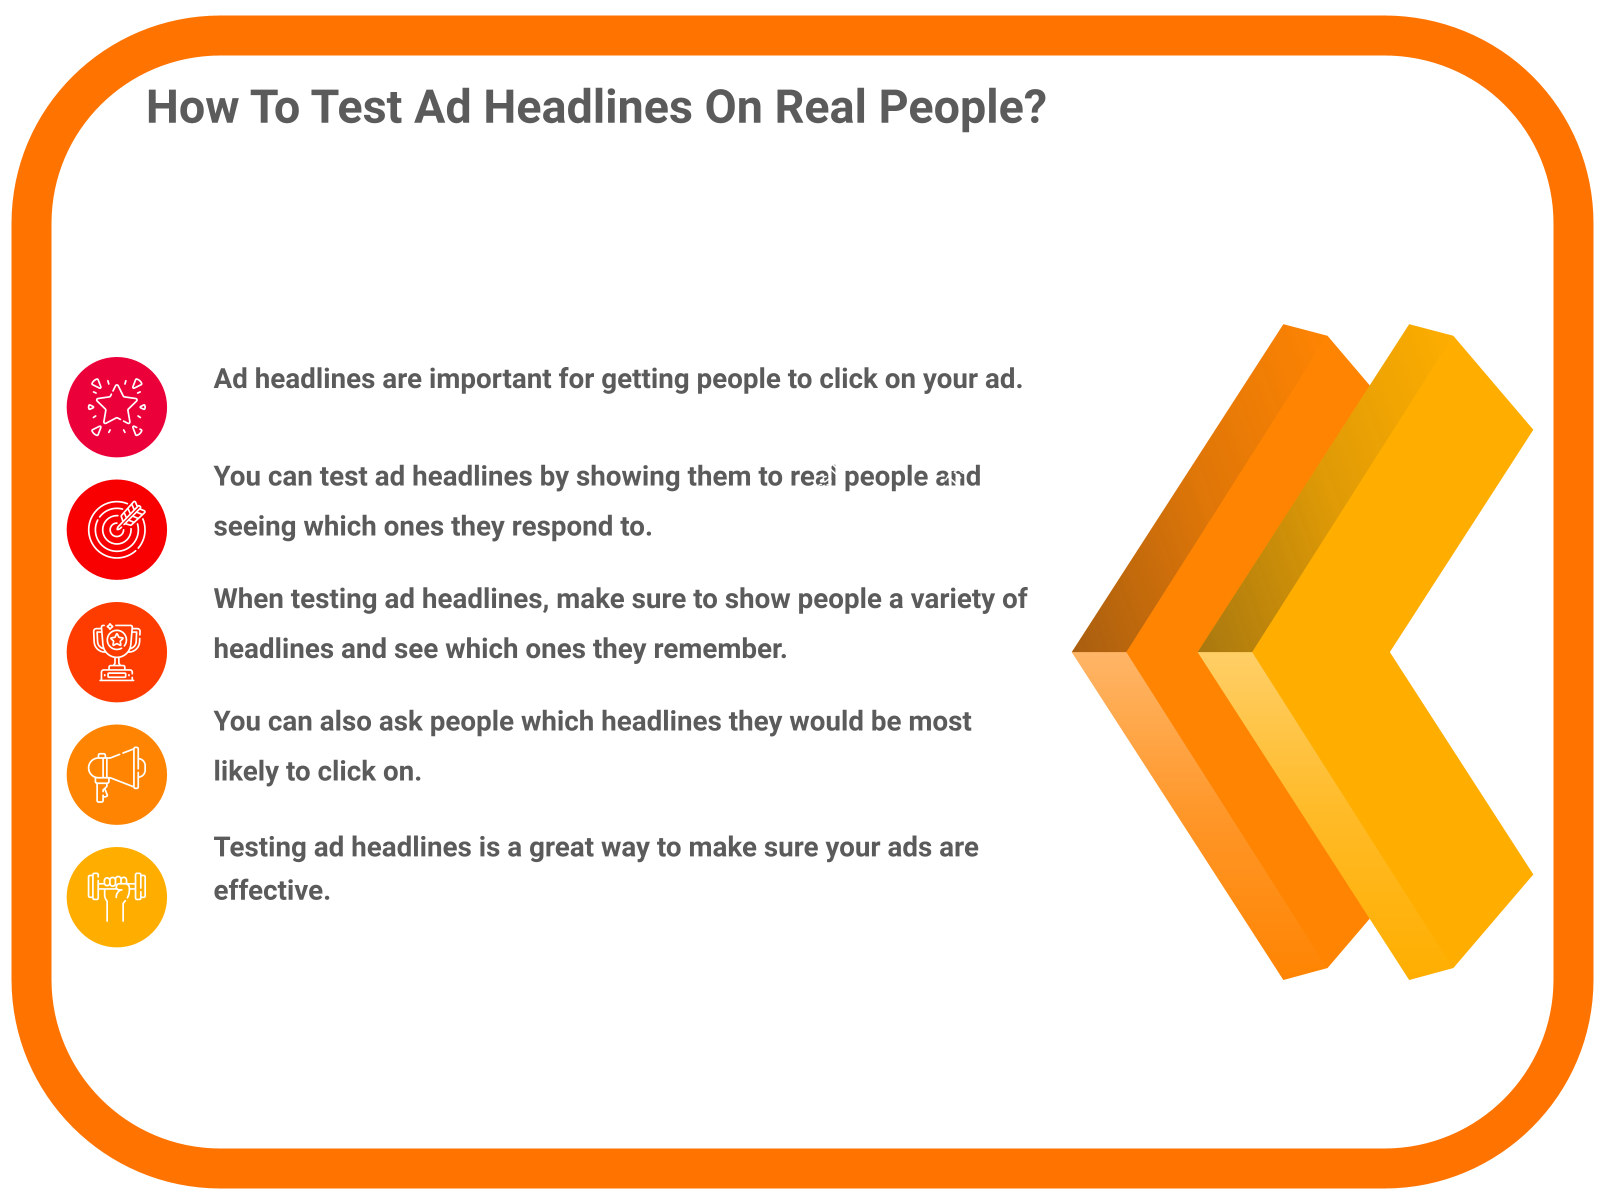 How To Test Ad Headlines with Real People?